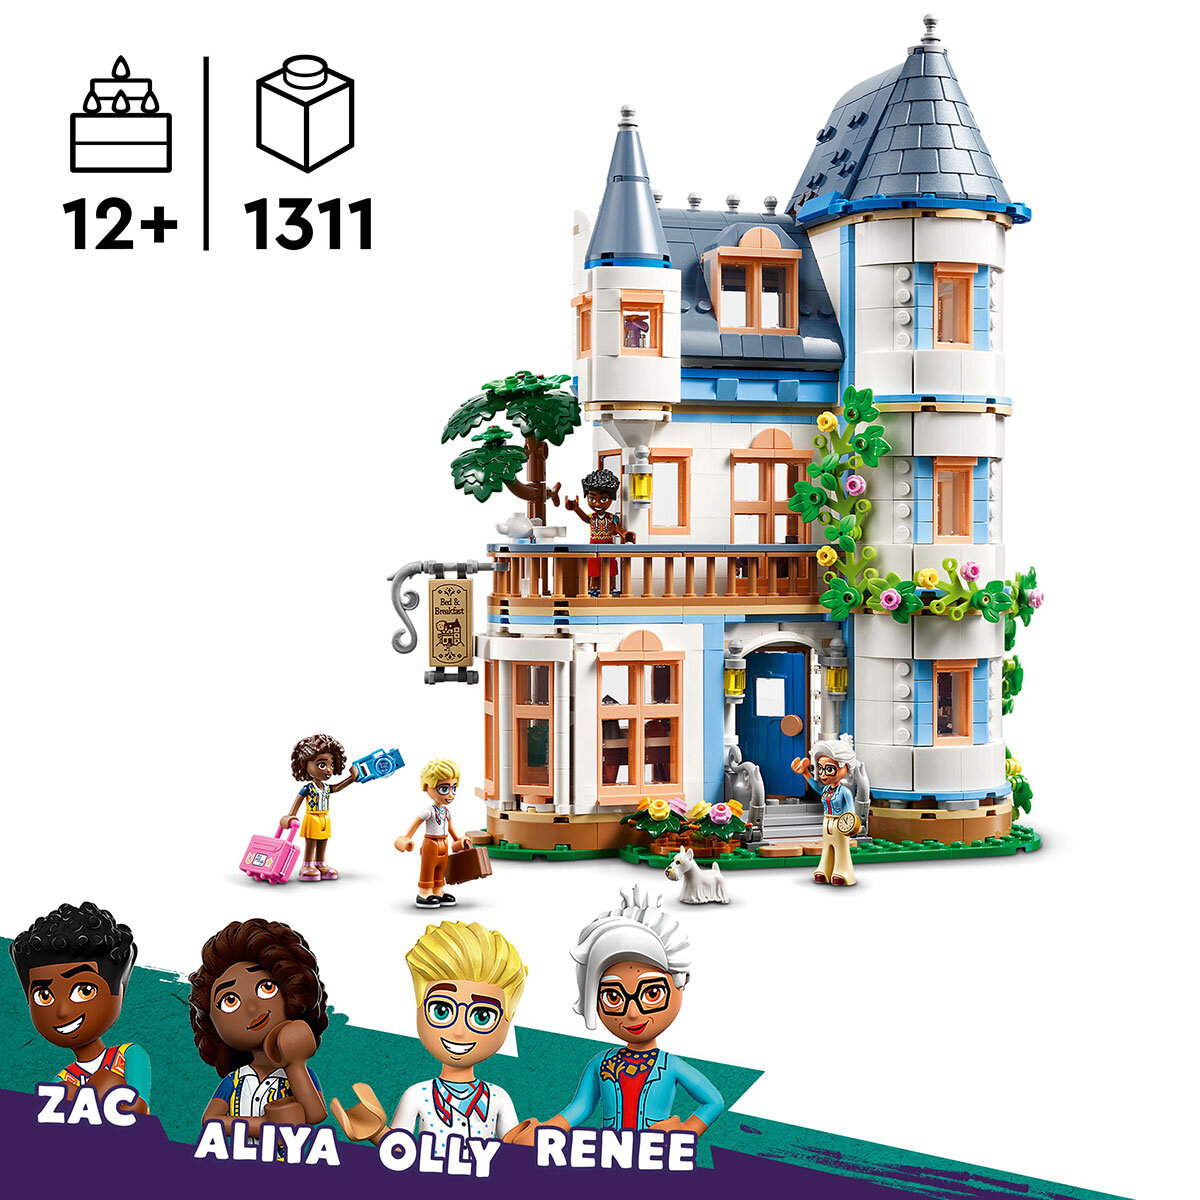 LEGO Friends Castle Bed and Breakfast Item Image